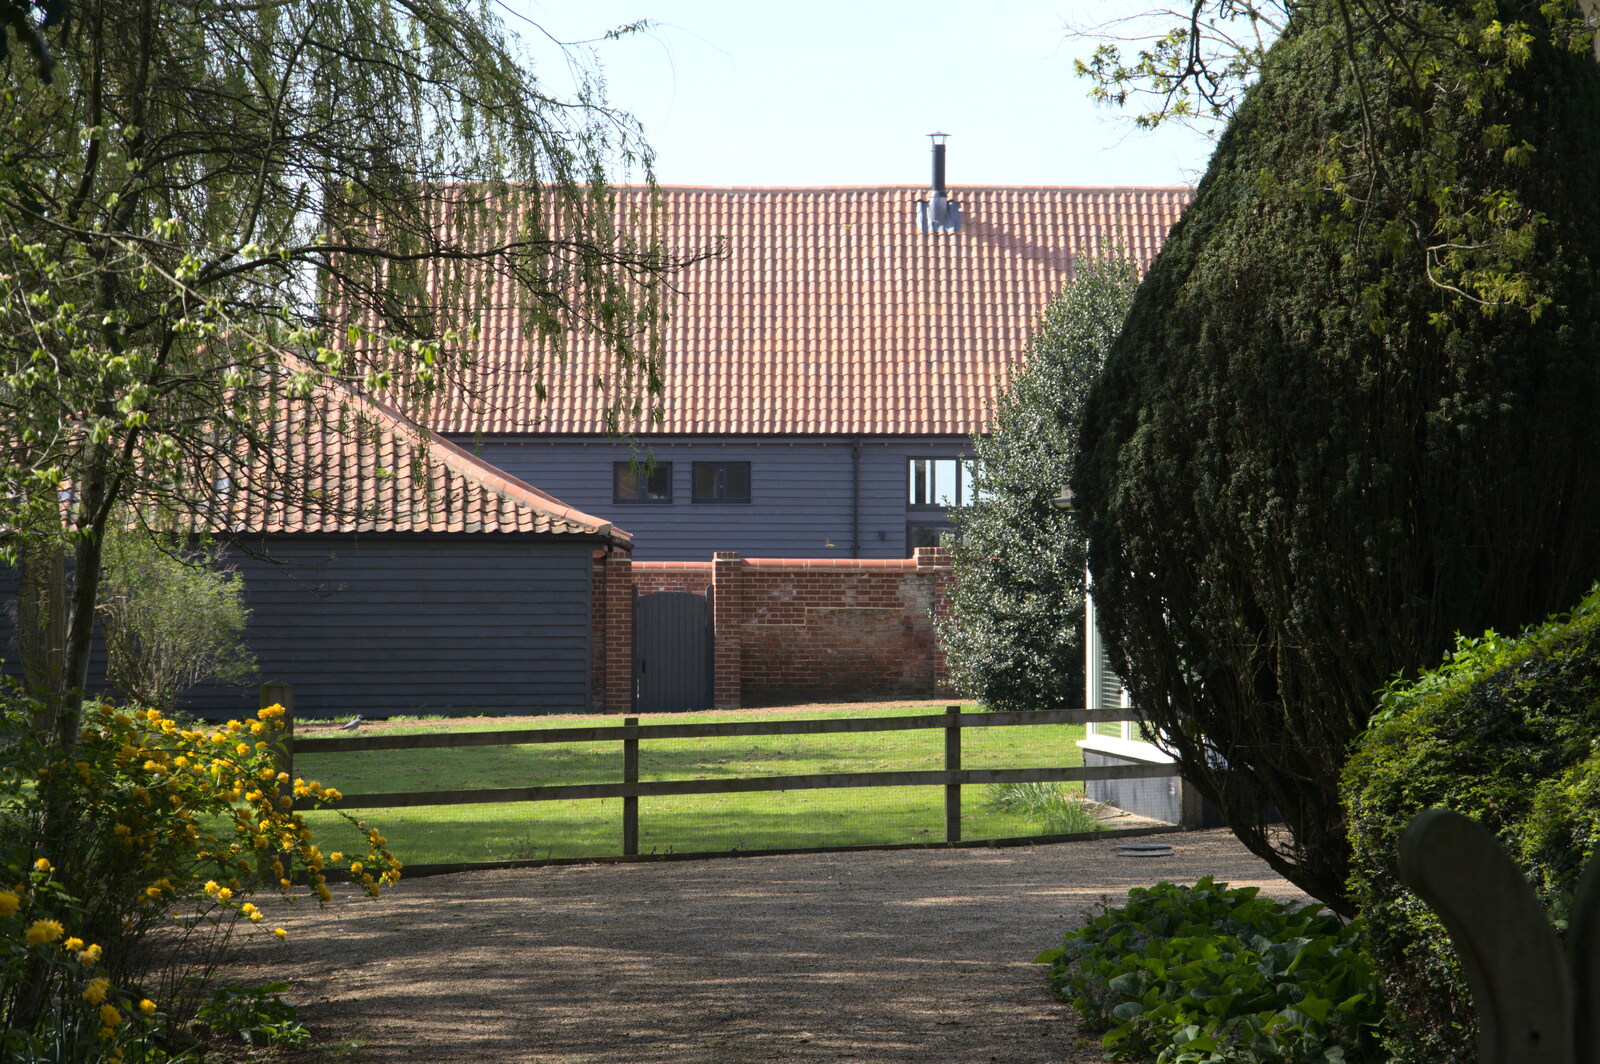 The new barn conversion near Church Farm from A Weekend Camping Trip in the Garden, Brome, Suffolk - 11th April 2020